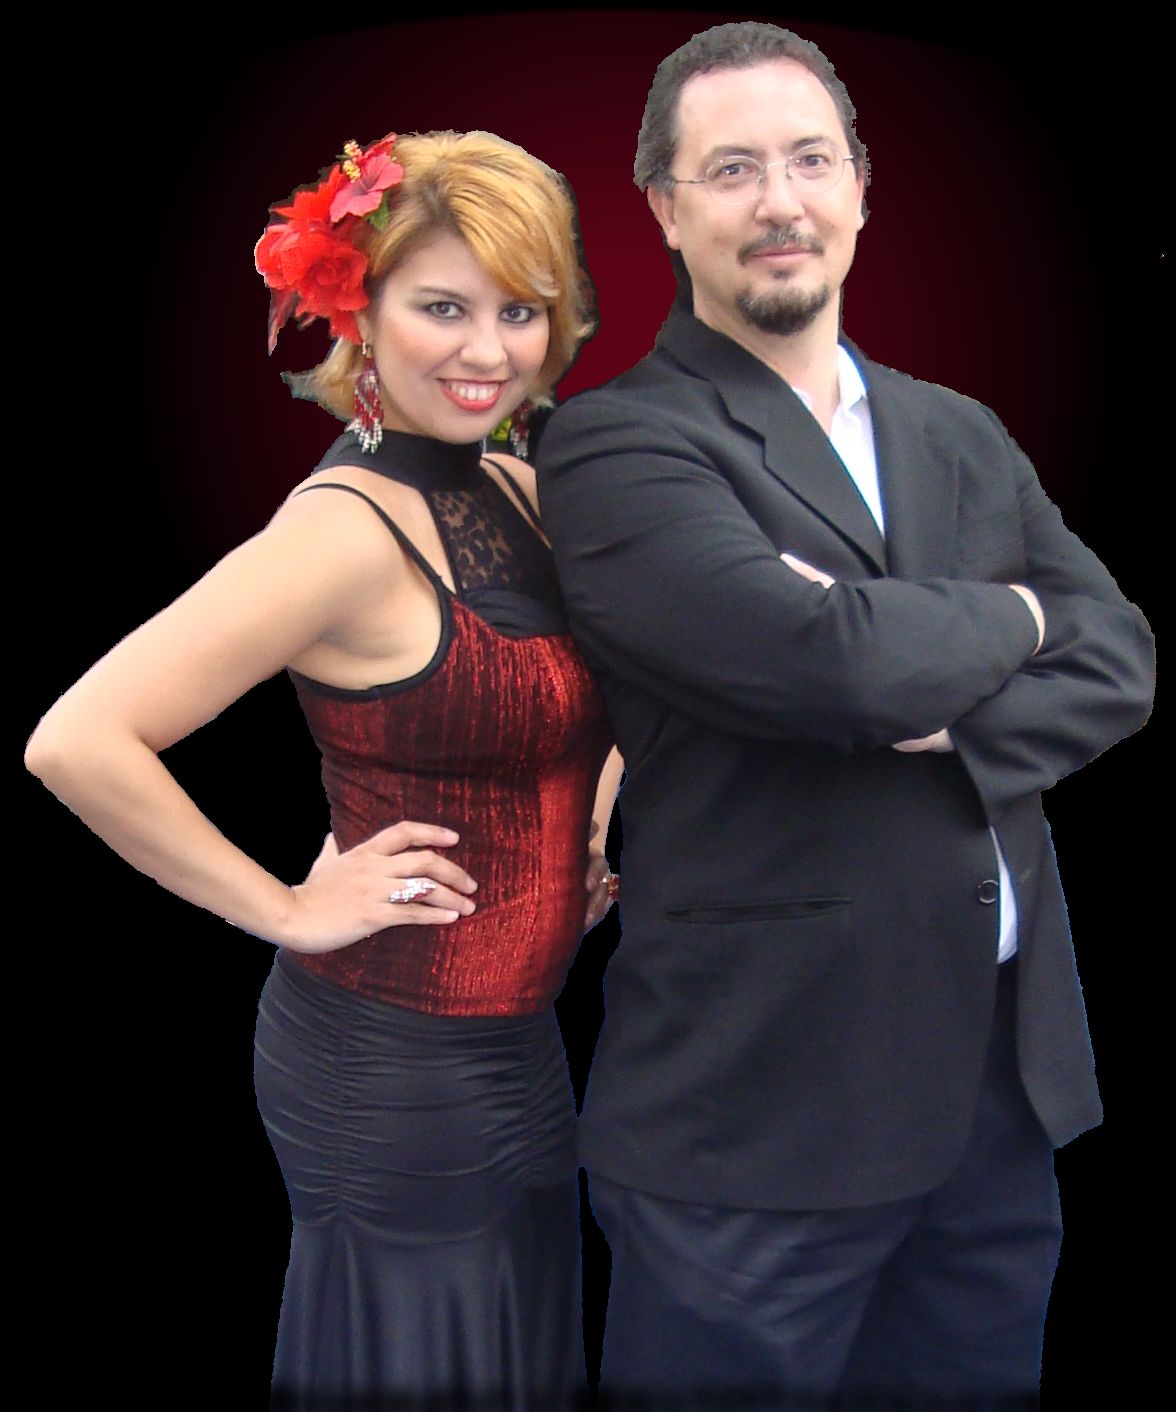 Woman with red flower in hair and red and black dress, standing next to man in dark suit with crossed arms.